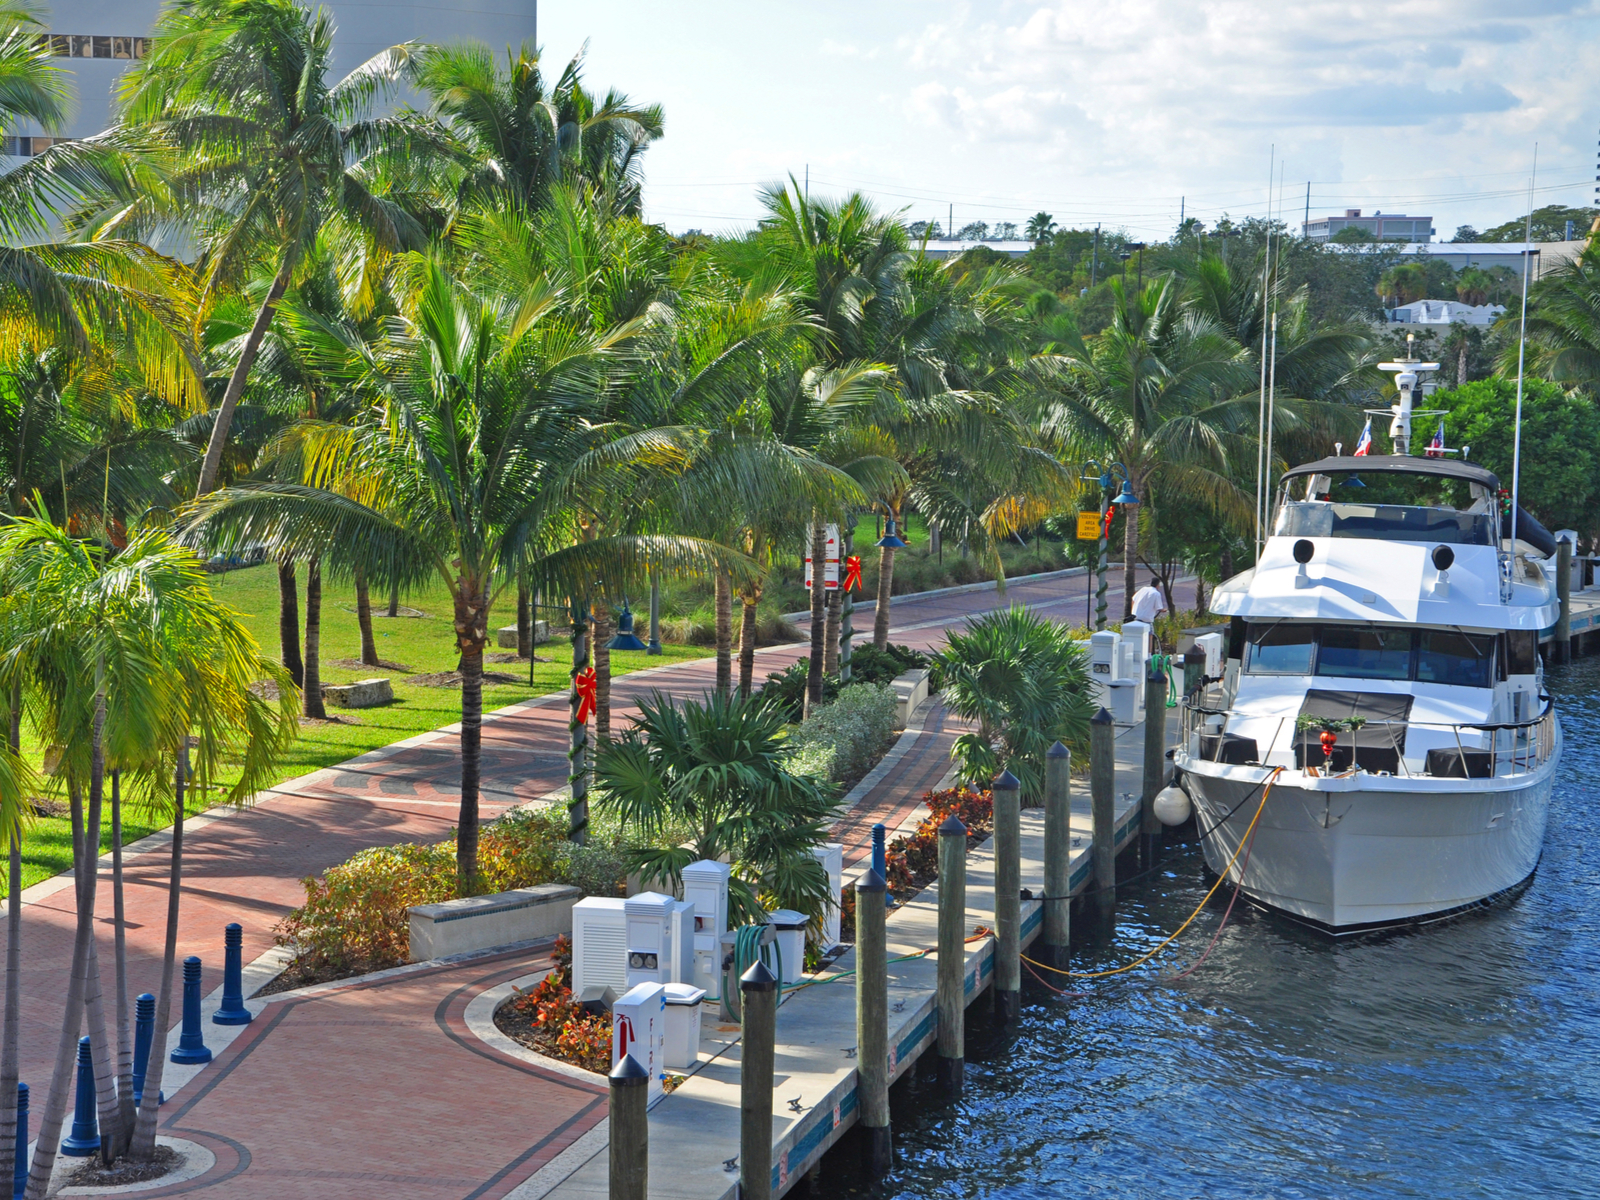 A small white boat docked for a boat tour, one of the best things to do in Fort Lauderdale